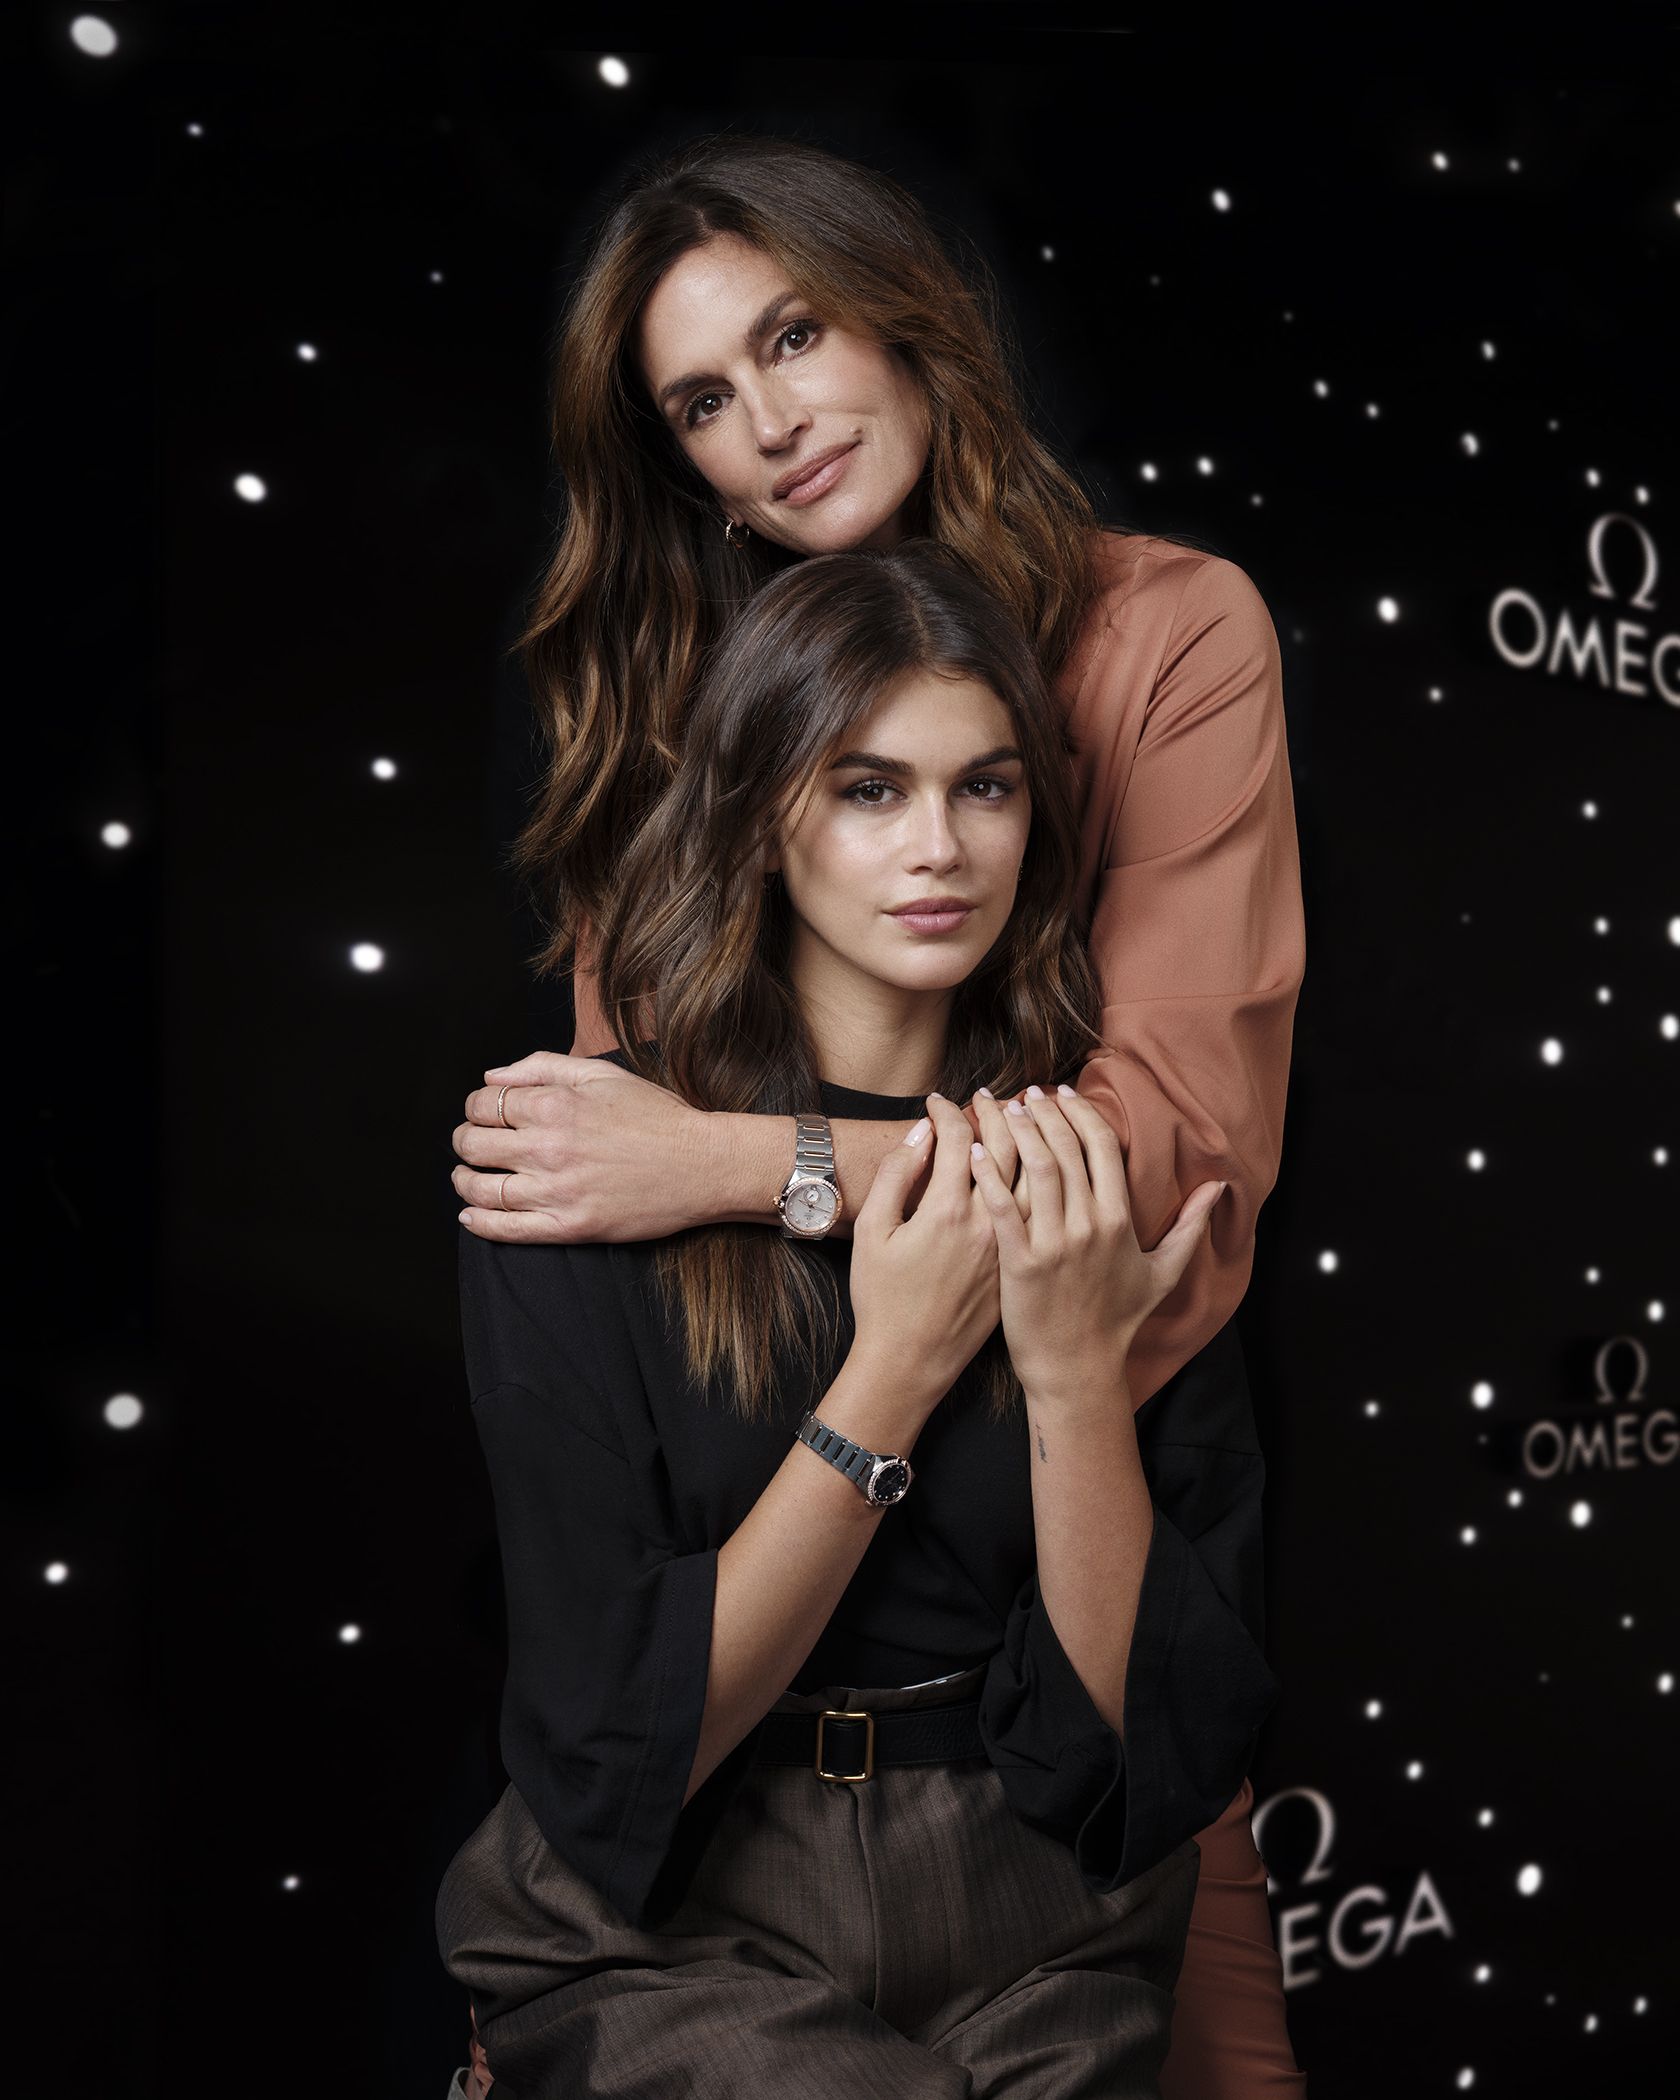 OMEGA Watches - #OMEGATresor / #OMEGAmychoice Wearing our newest Trésor,  Kaia Gerber relaxes in gold. Discover the three new models in the  collection. #NormanJeanRoy omegawatches.com/Tresor | Facebook